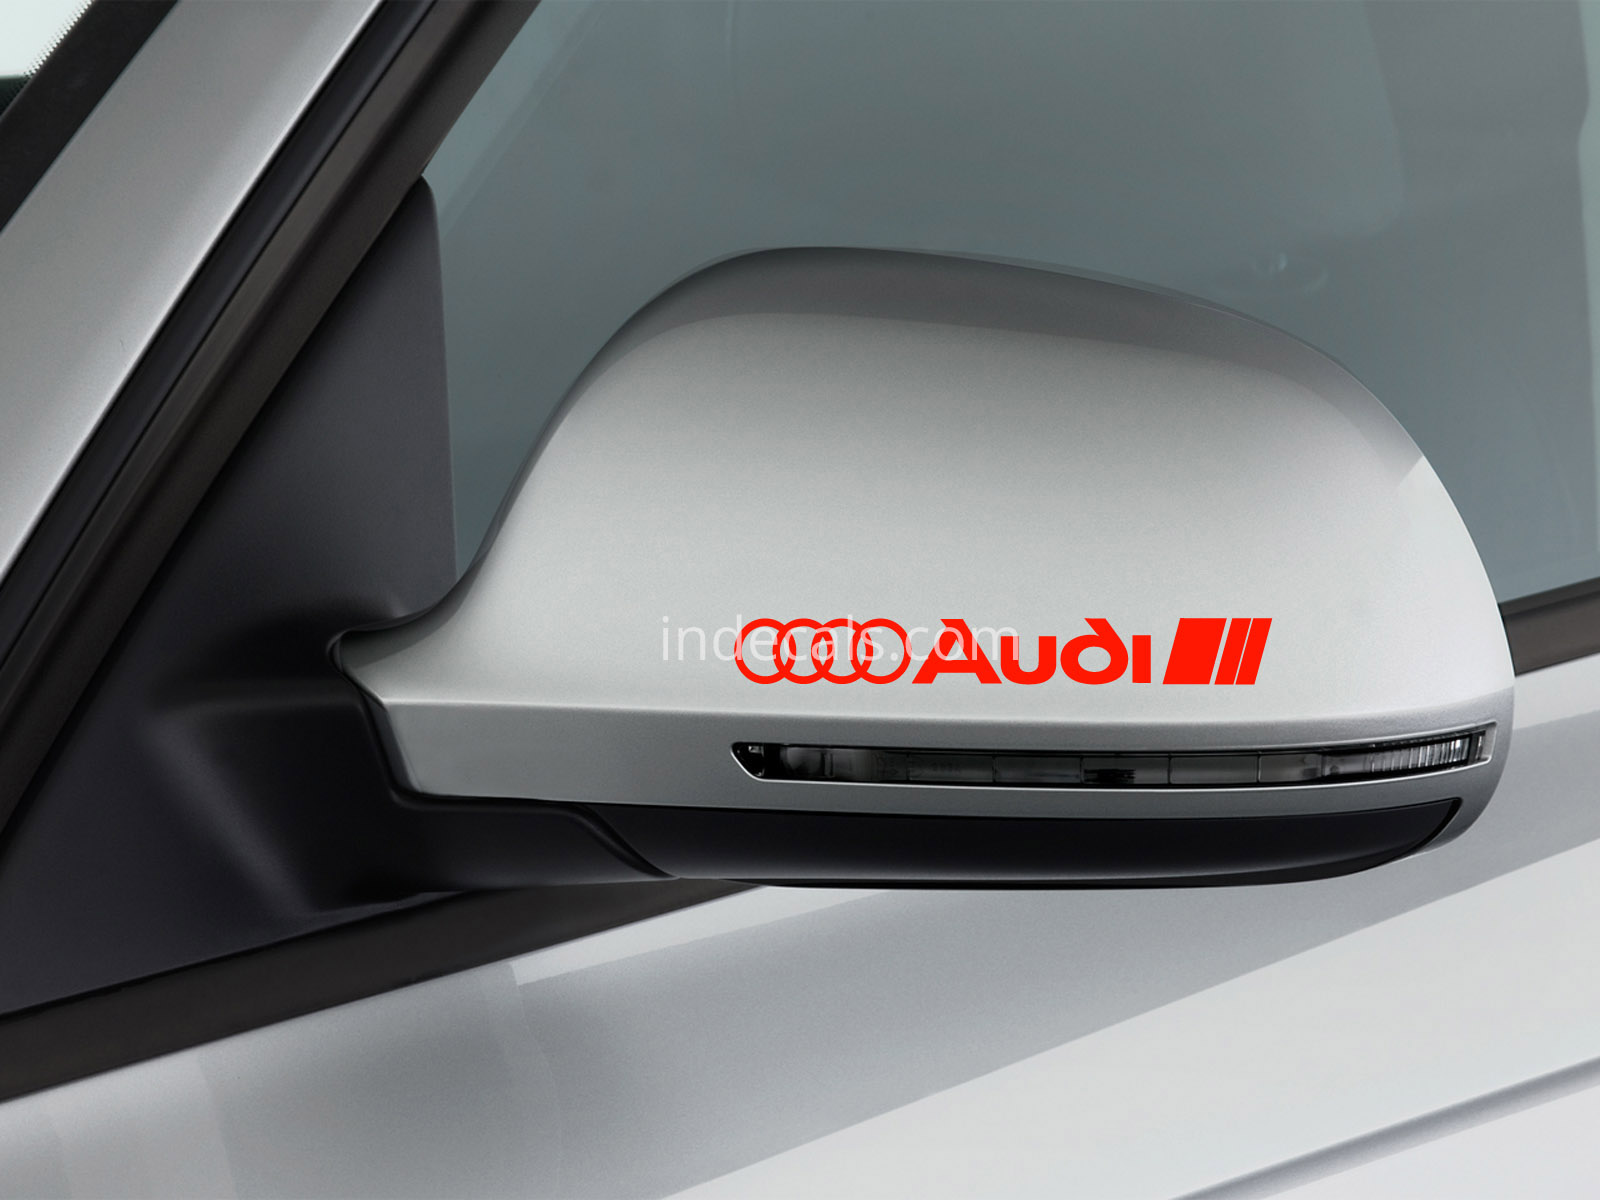 3 x Audi Stickers for Mirrors - White